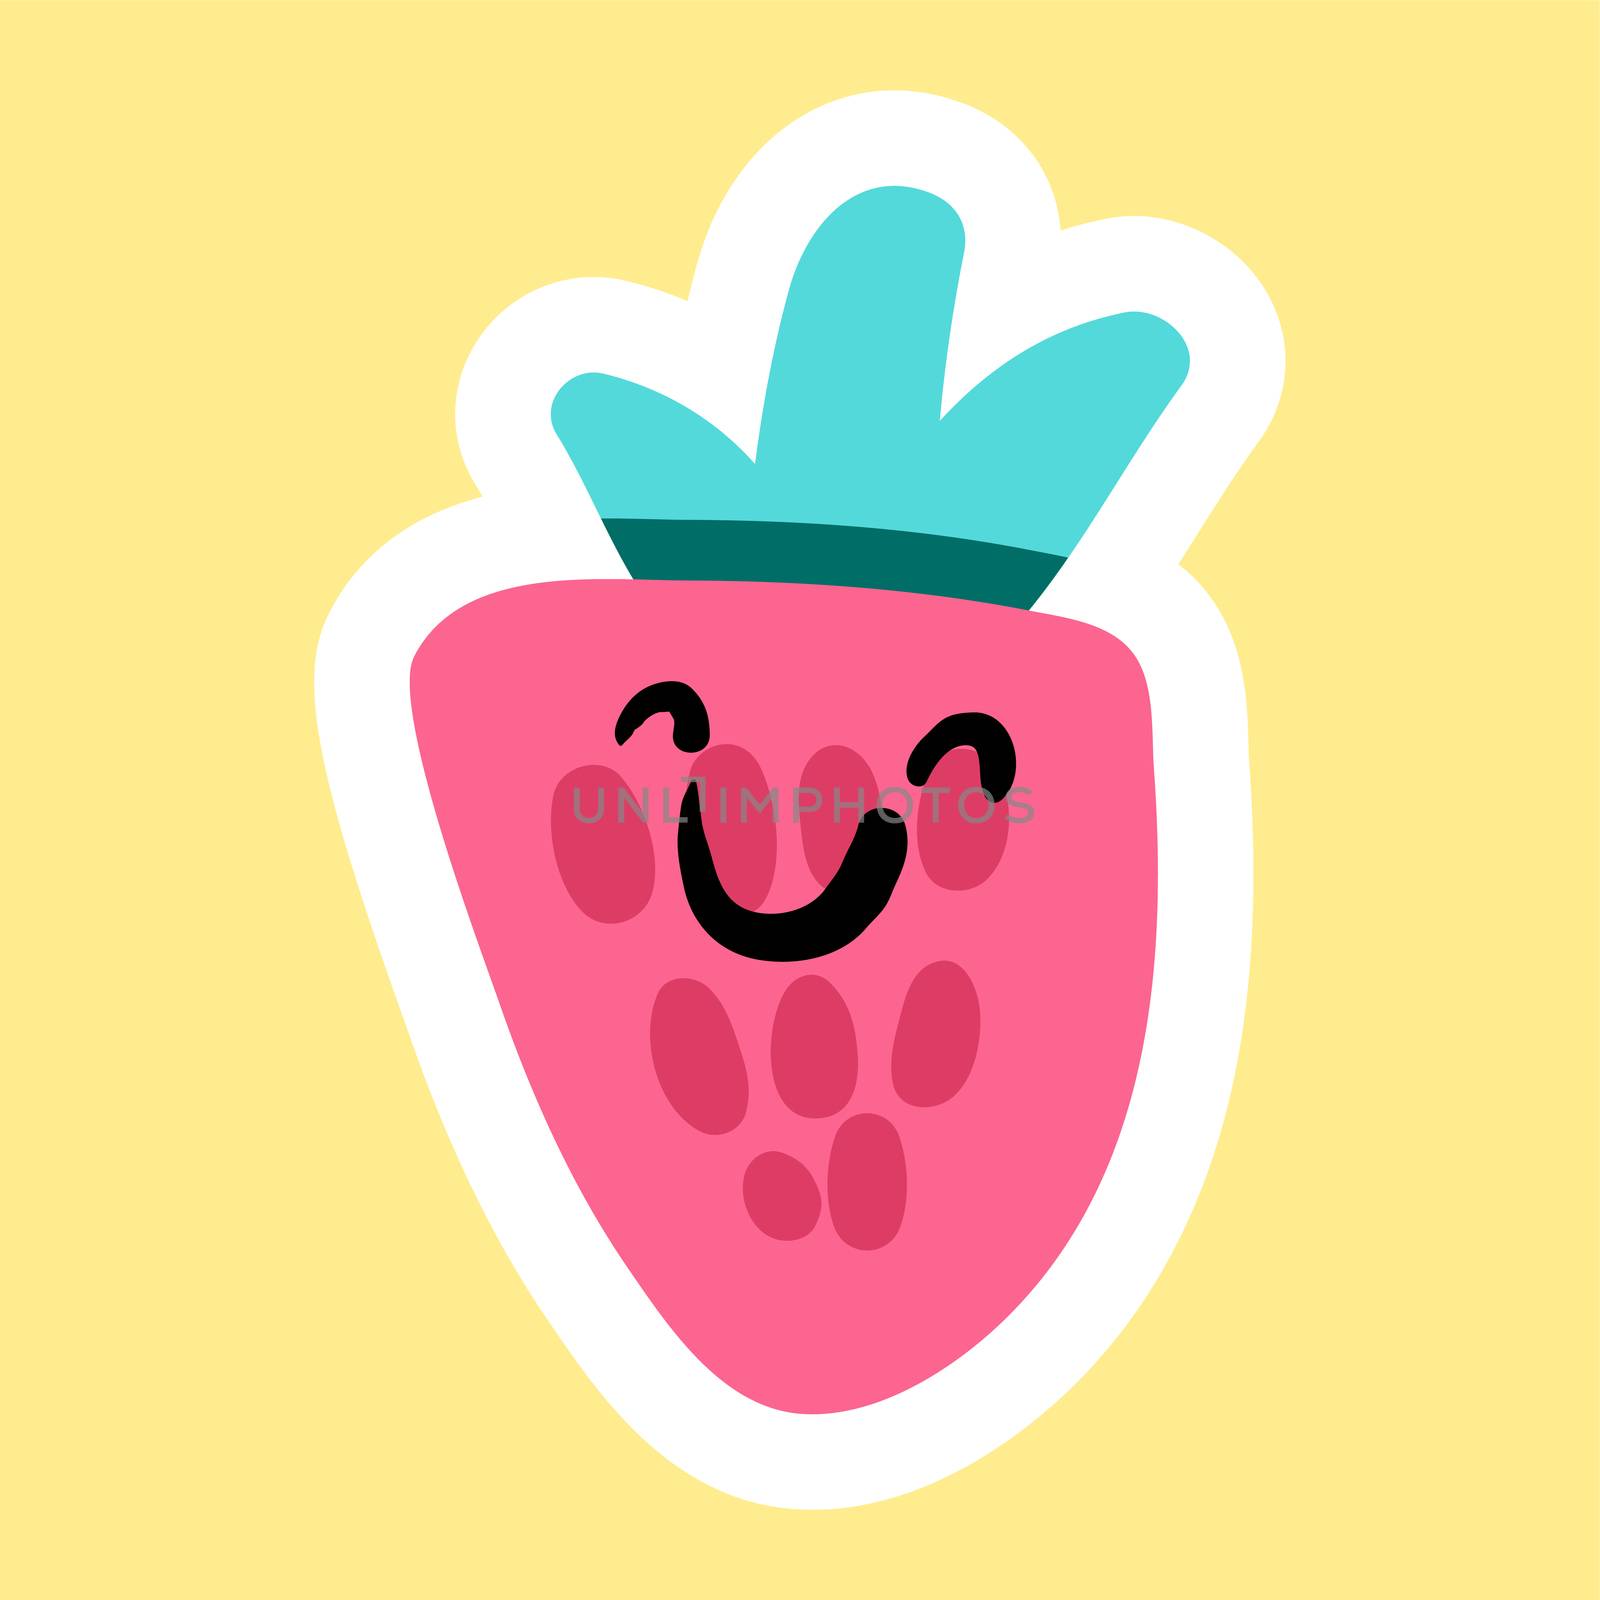 Cheerful smiling strawberry by barsrsind